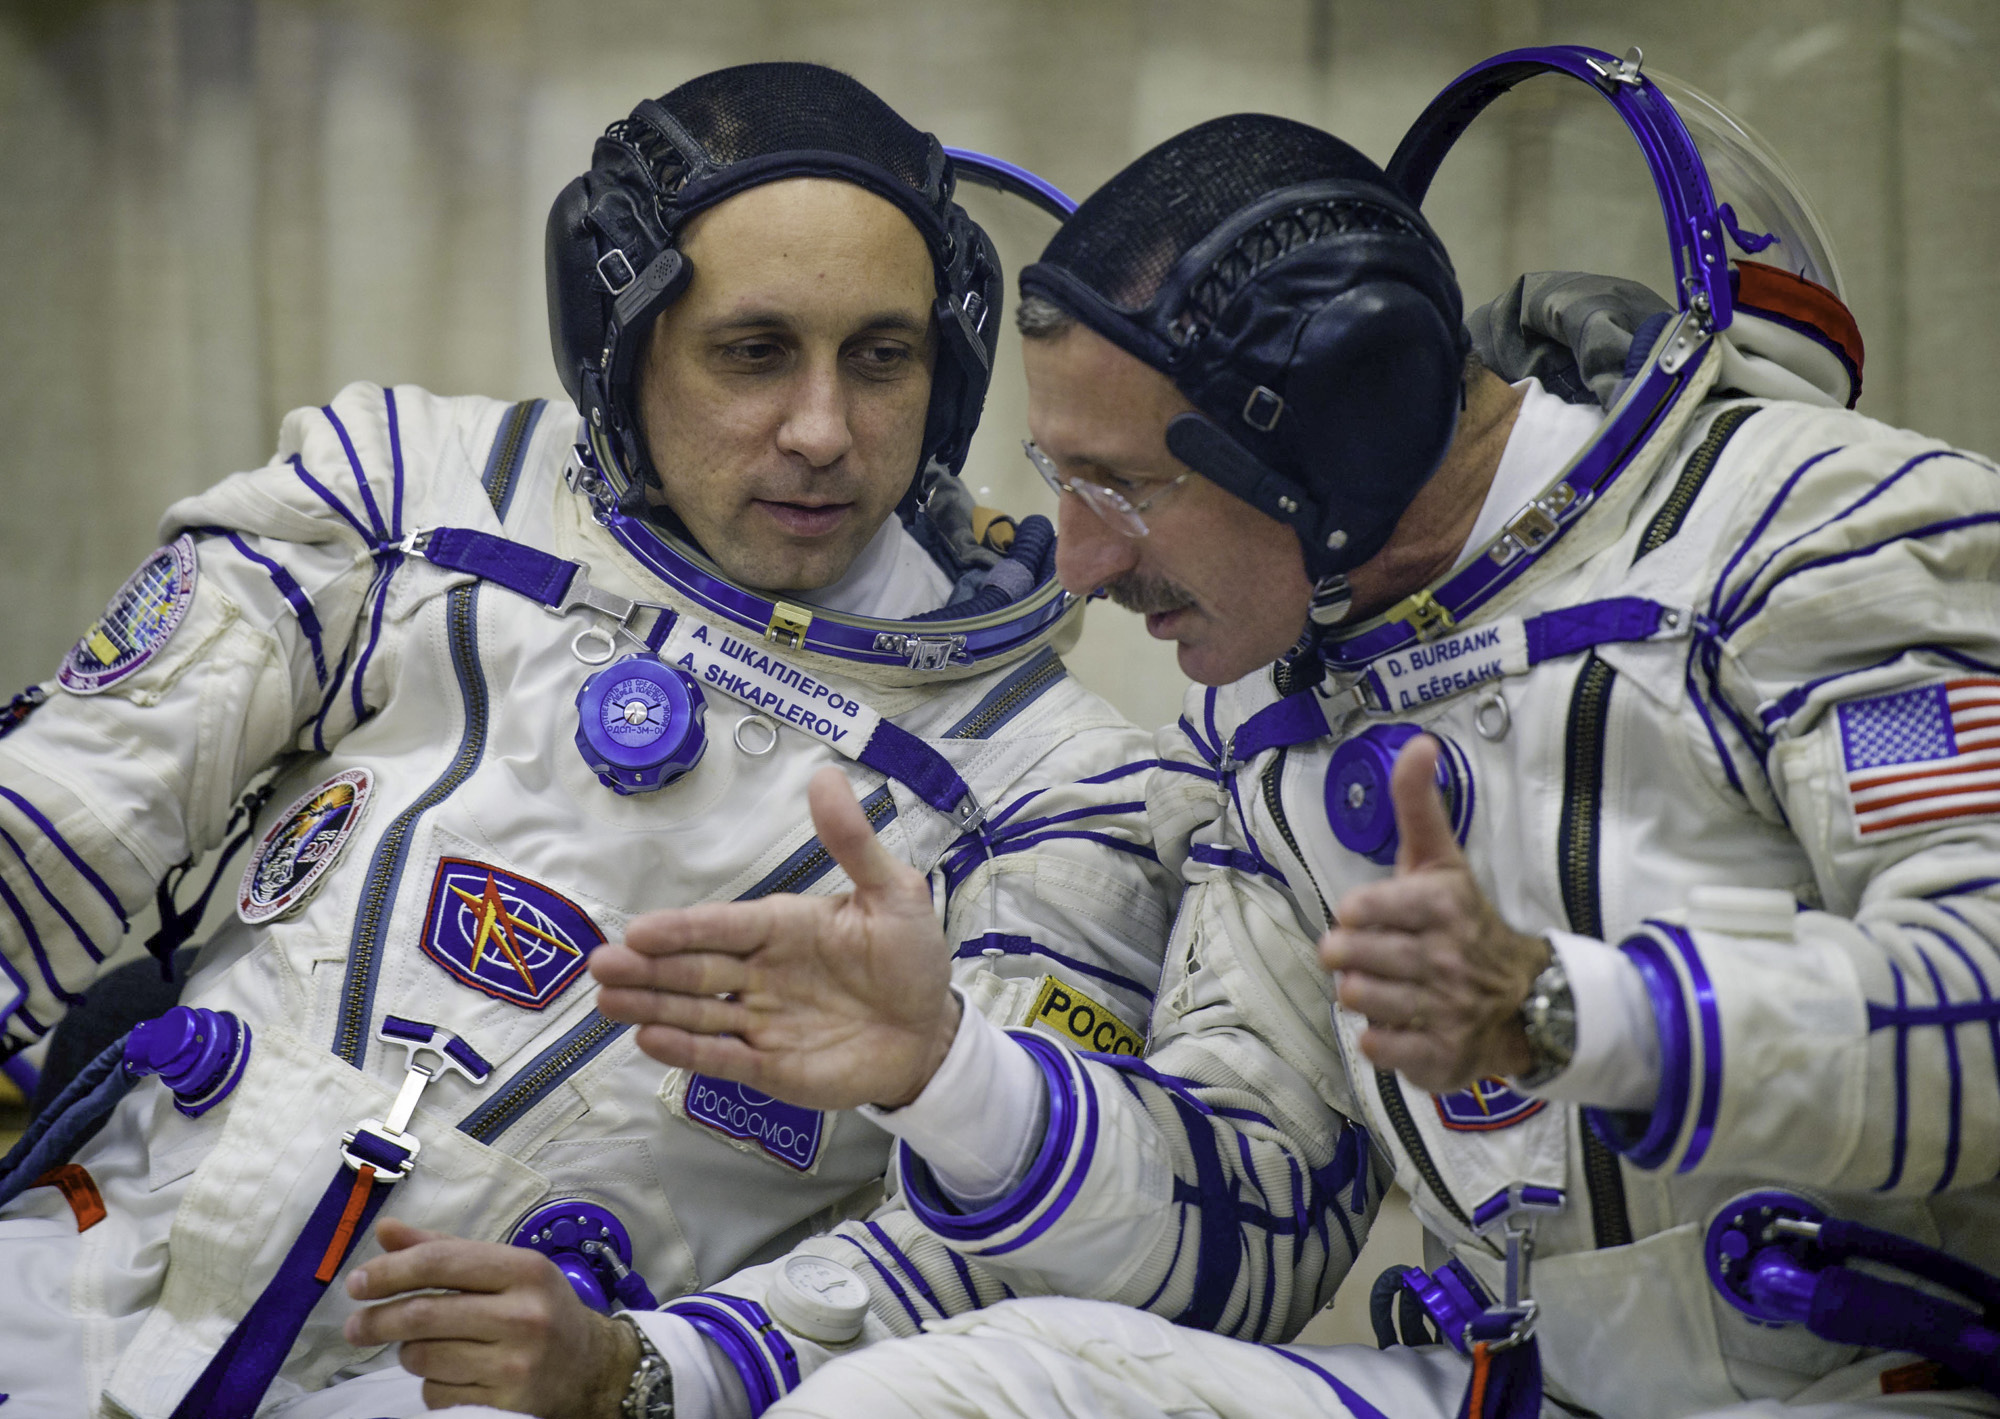  Expedition 29 NASA Flight Engineer Daniel Burbank, right, and Expedition 29 Soyuz Commander Anton Shkaplerov share a few words as they wait for their Russian Sokol suits to be prepared for launch to the International Space Station at the Baikonur Co